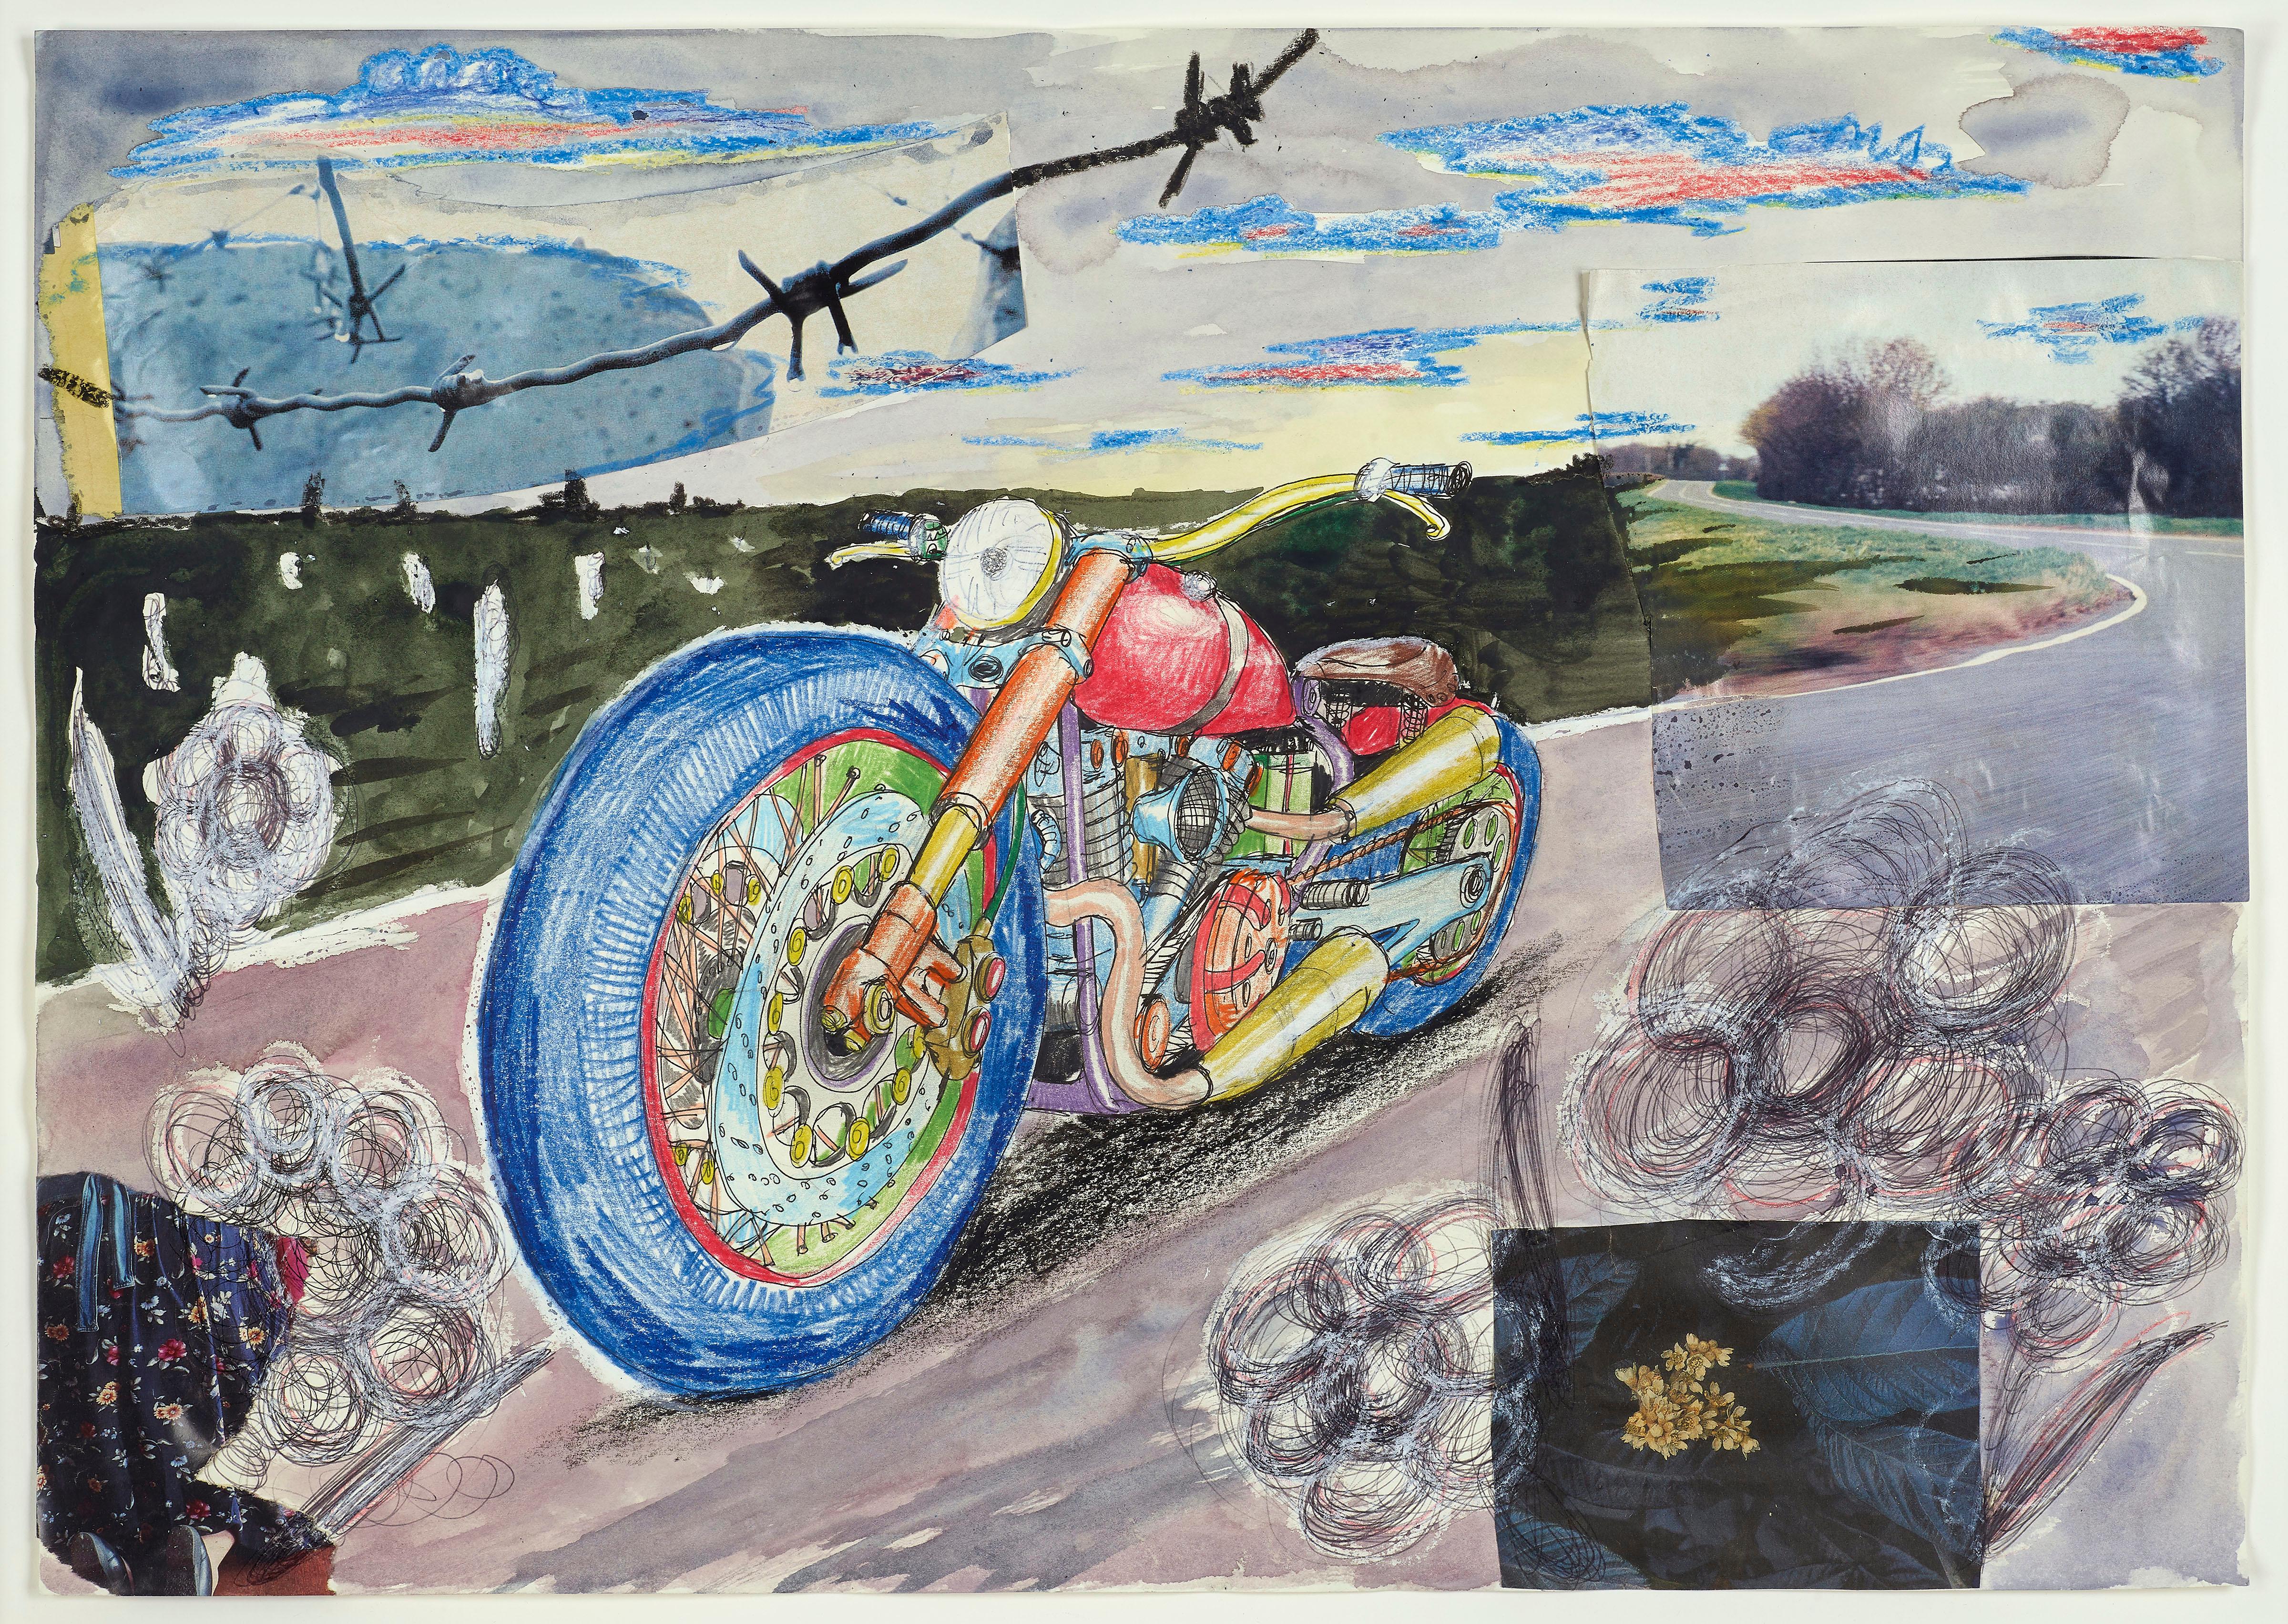 "Untitled" watercolour and collage work on paper by British artist Grayson Perry